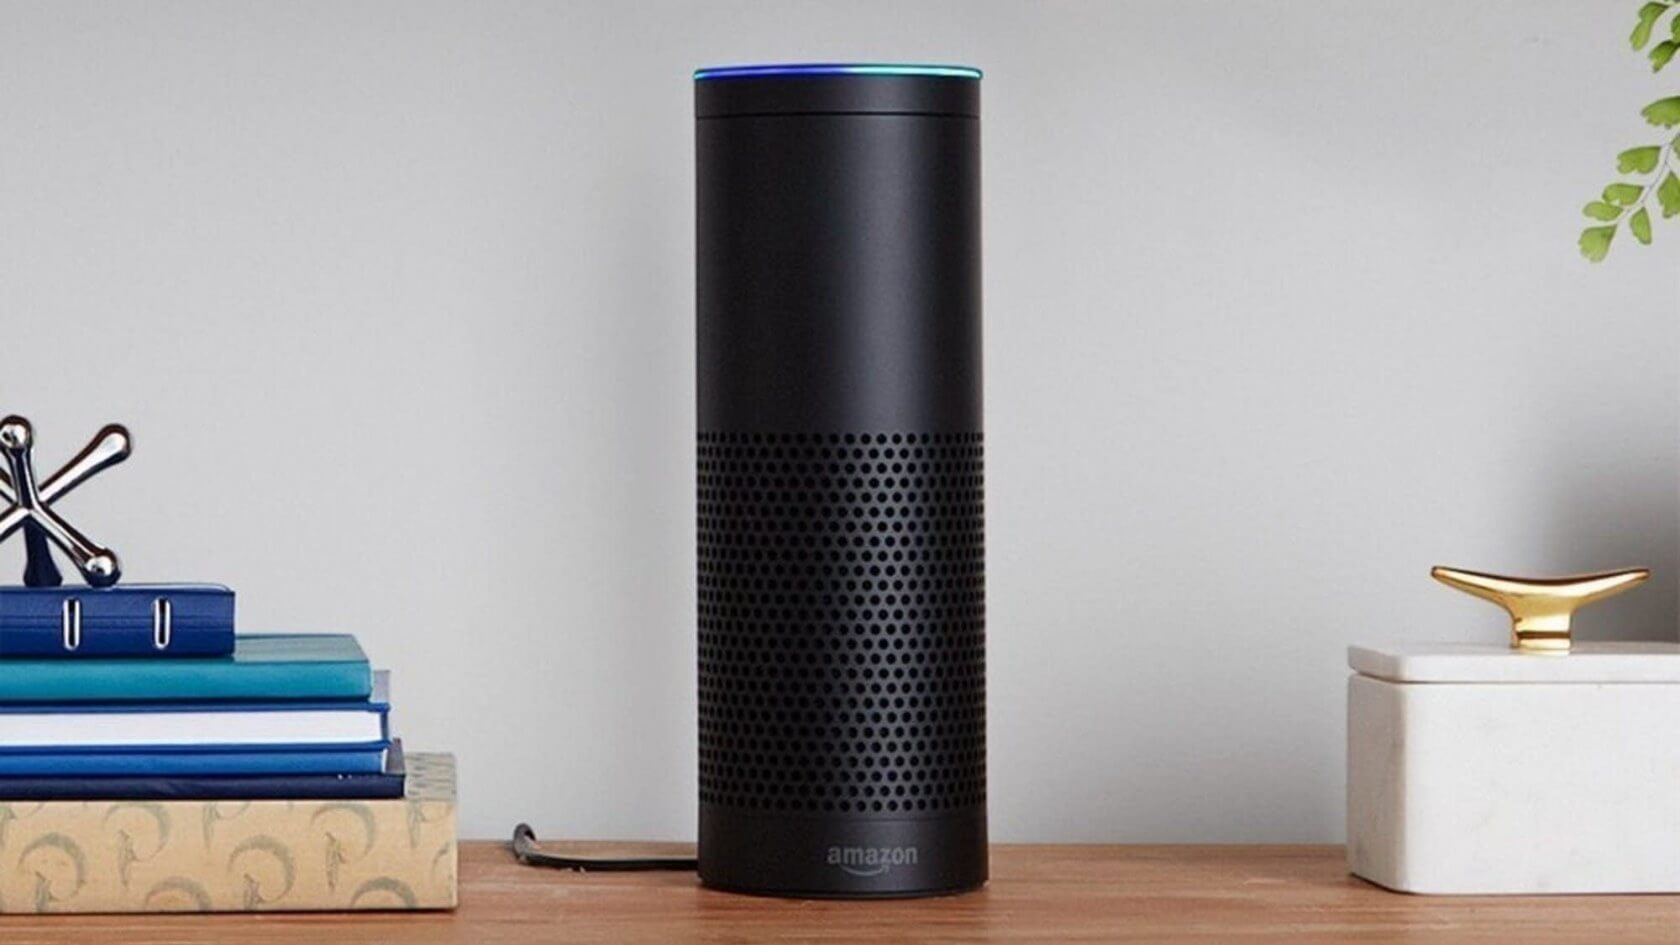 Amazon S Echo Song Id Feature Tells You The Name Of Songs Before